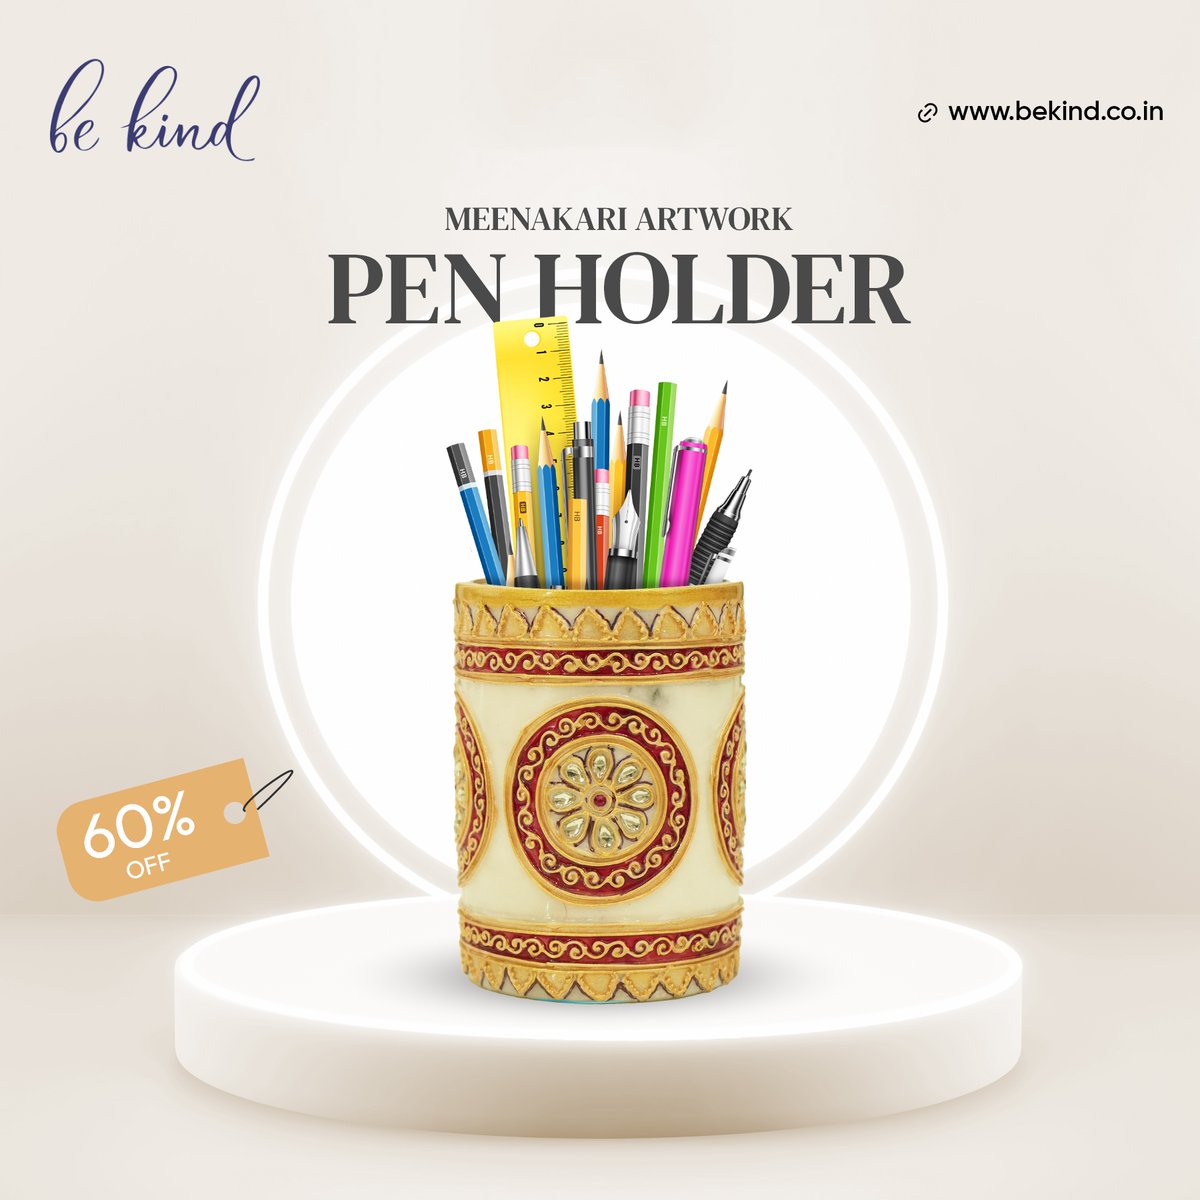 Add sophistication to your workspace with our Marble Pen Holder, now at 60% off! Elevate your desk decor with this timeless piece. Shop now:tinyurl.com/33z3mtkp #WorkspaceElegance #MarblePenHolder #DeskDecor #SophisticatedWorkspace #OfficeStyle #TimelessDesign #OfficeUpgrade